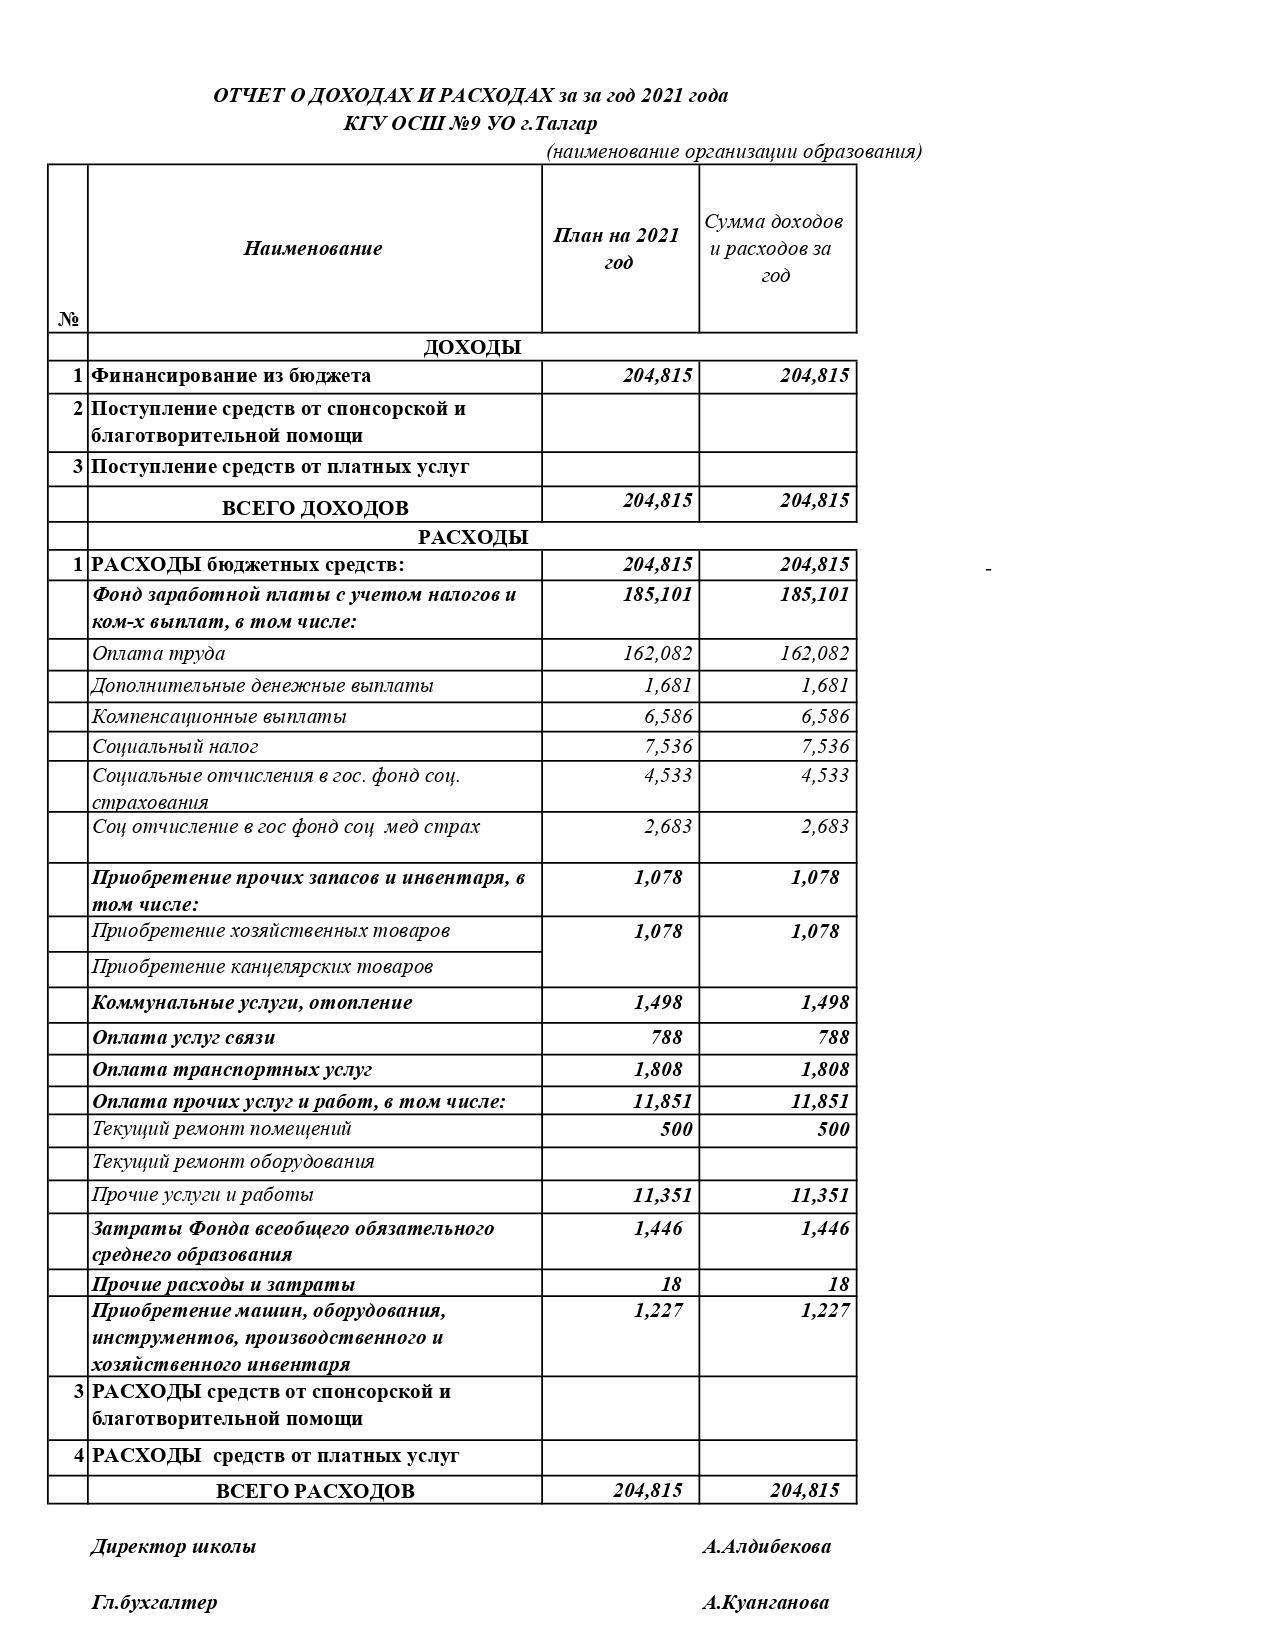 Statement of income and expenses